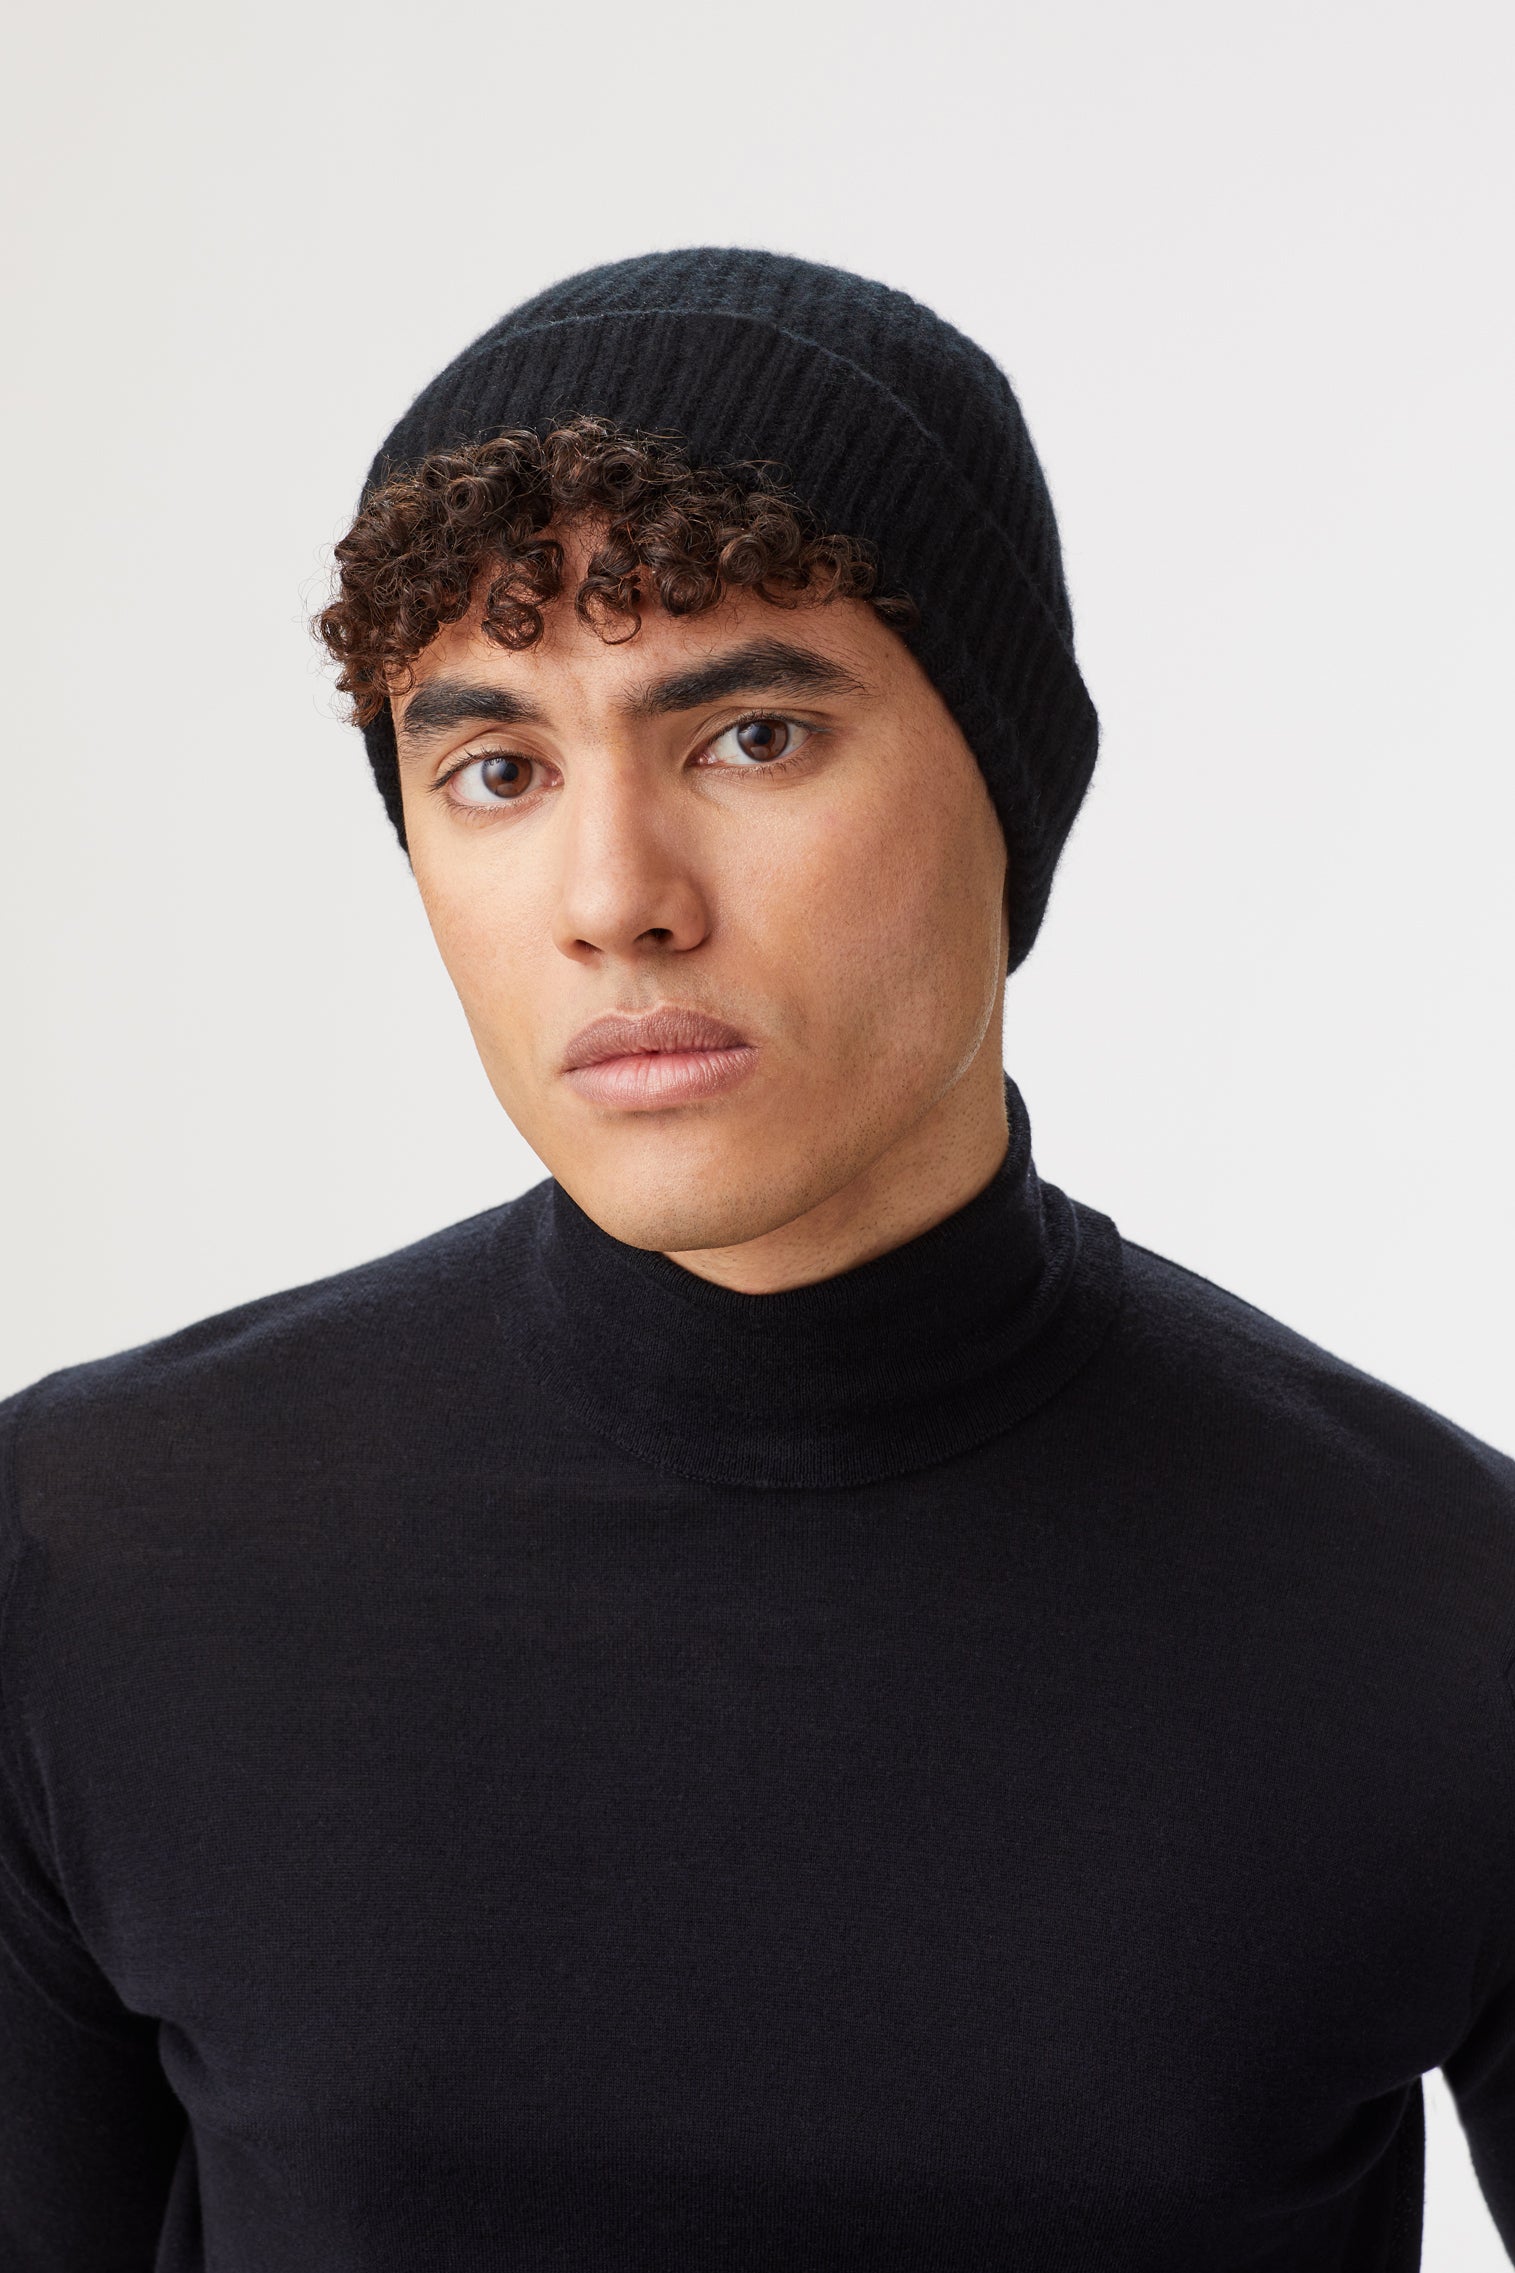 Black Cashmere Ski Beanie - You May Also Like - Lock & Co. Hatters London UK